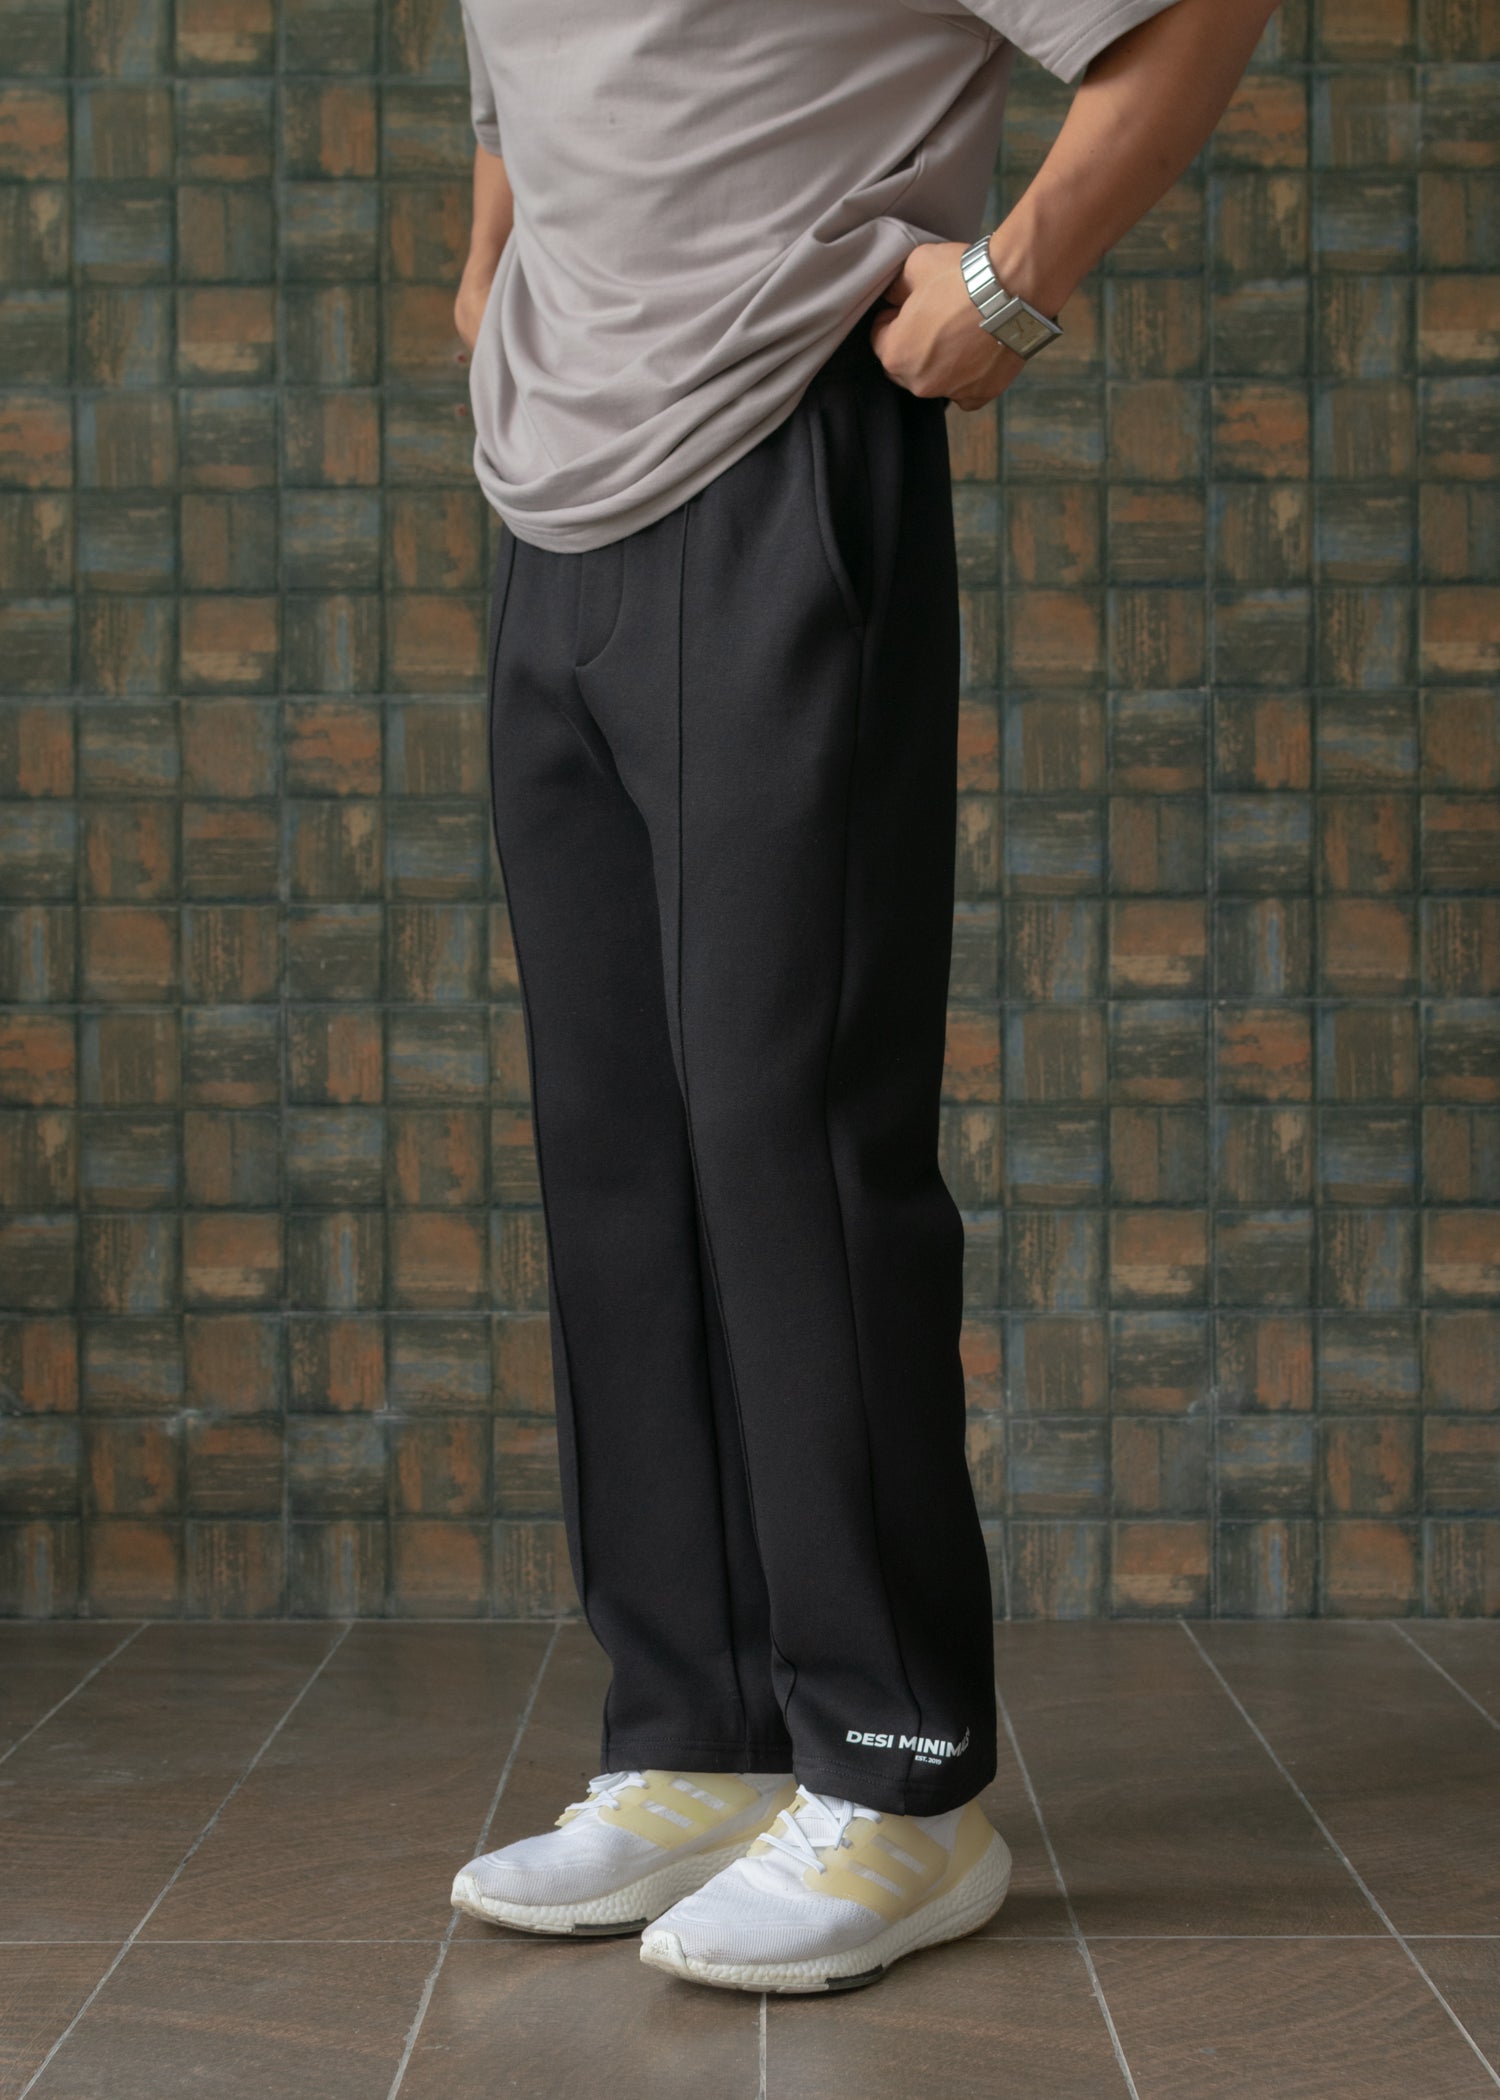 Wide Leg Maternity Pants for Work or Lounge Through Pregnancy & Beyond